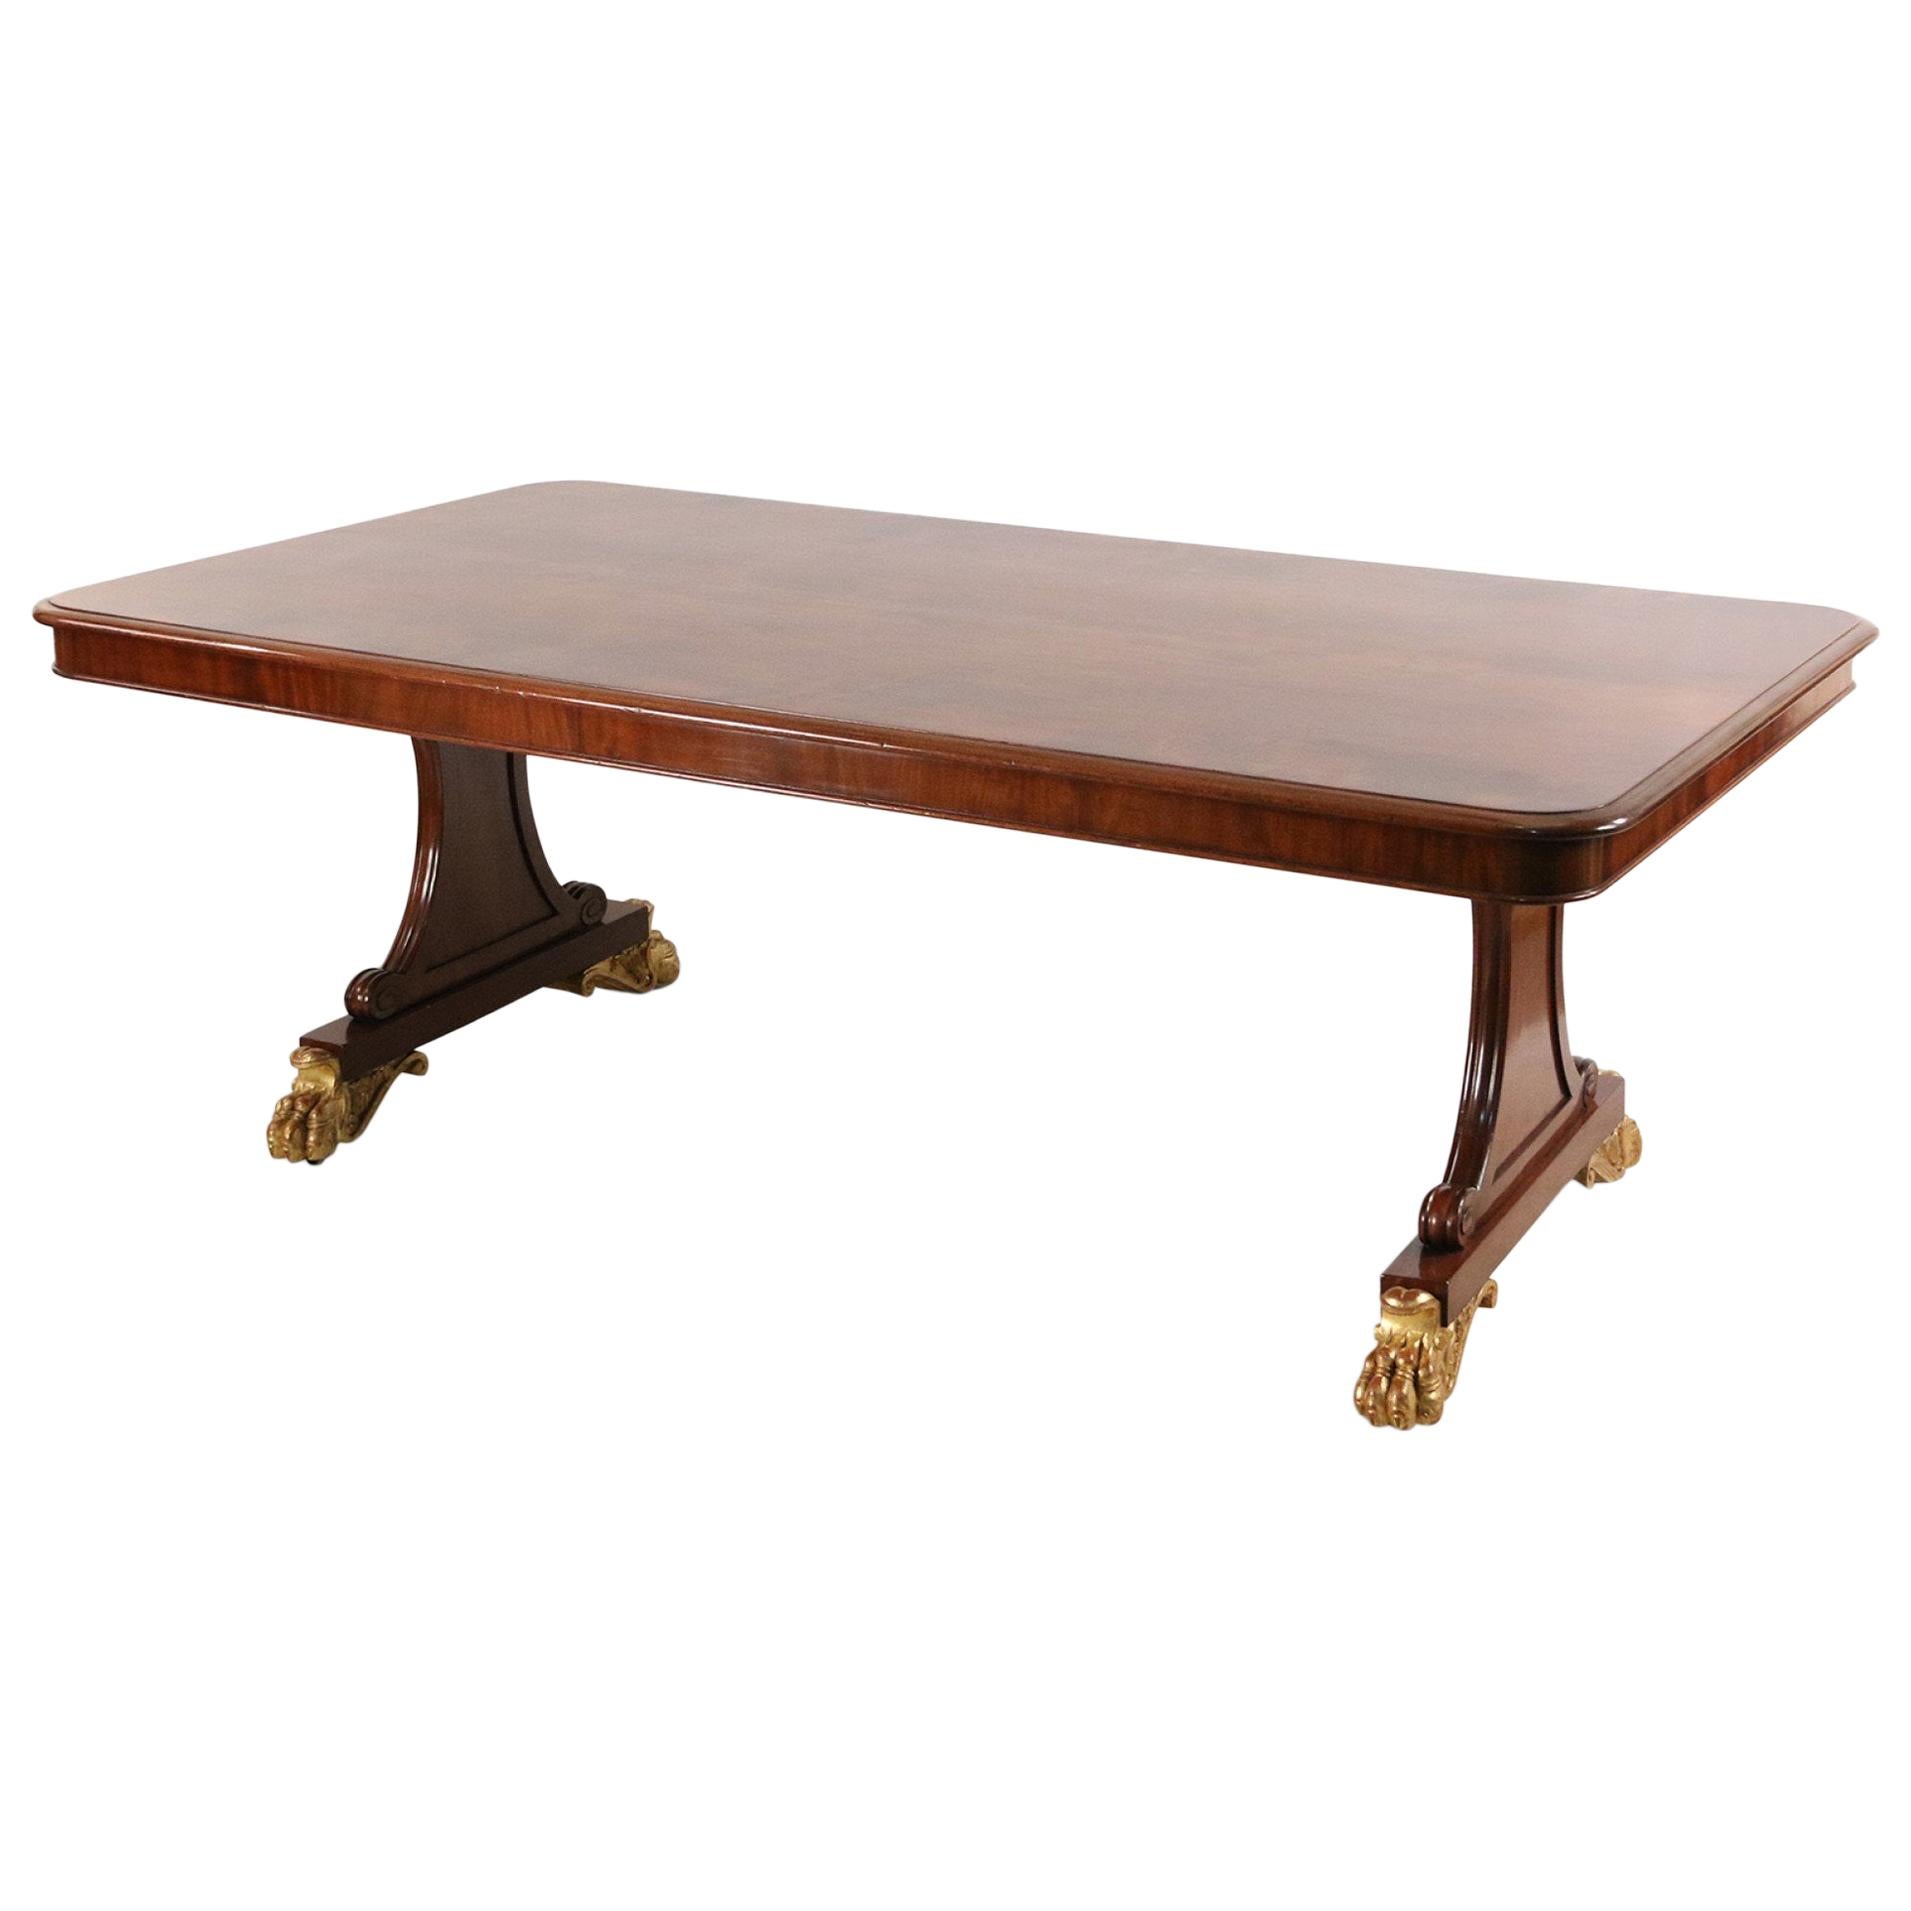 English Regency Mahogany Claw Foot Dining Table For Sale